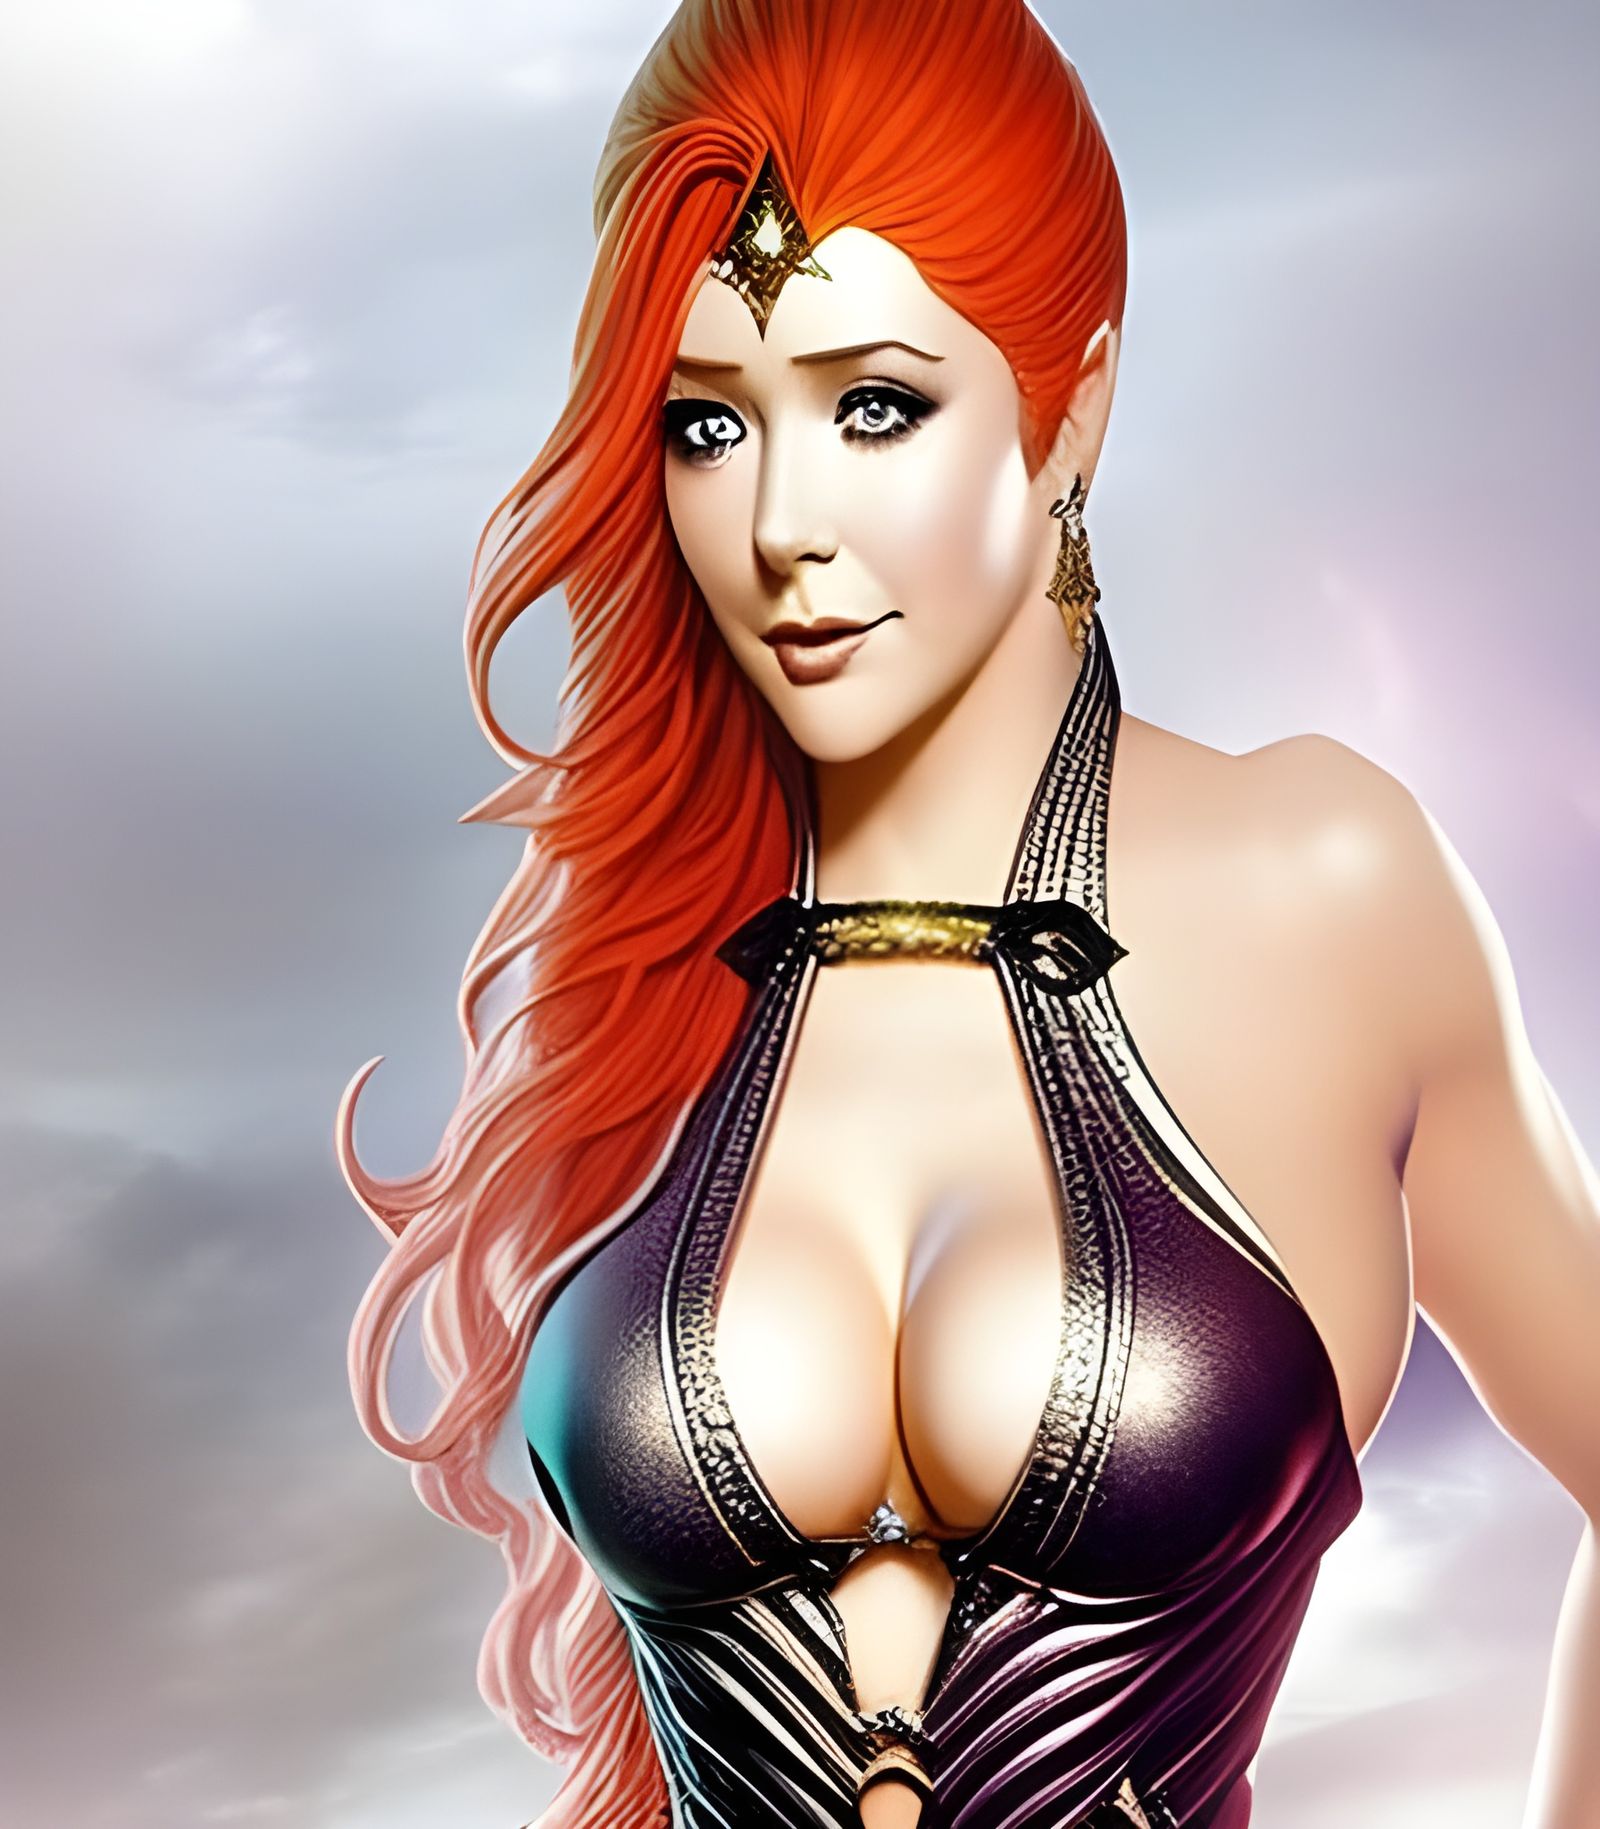 A Certain Red Haired Witch From A Certain Vampire Slayer Tv Show Ai Generated Artwork